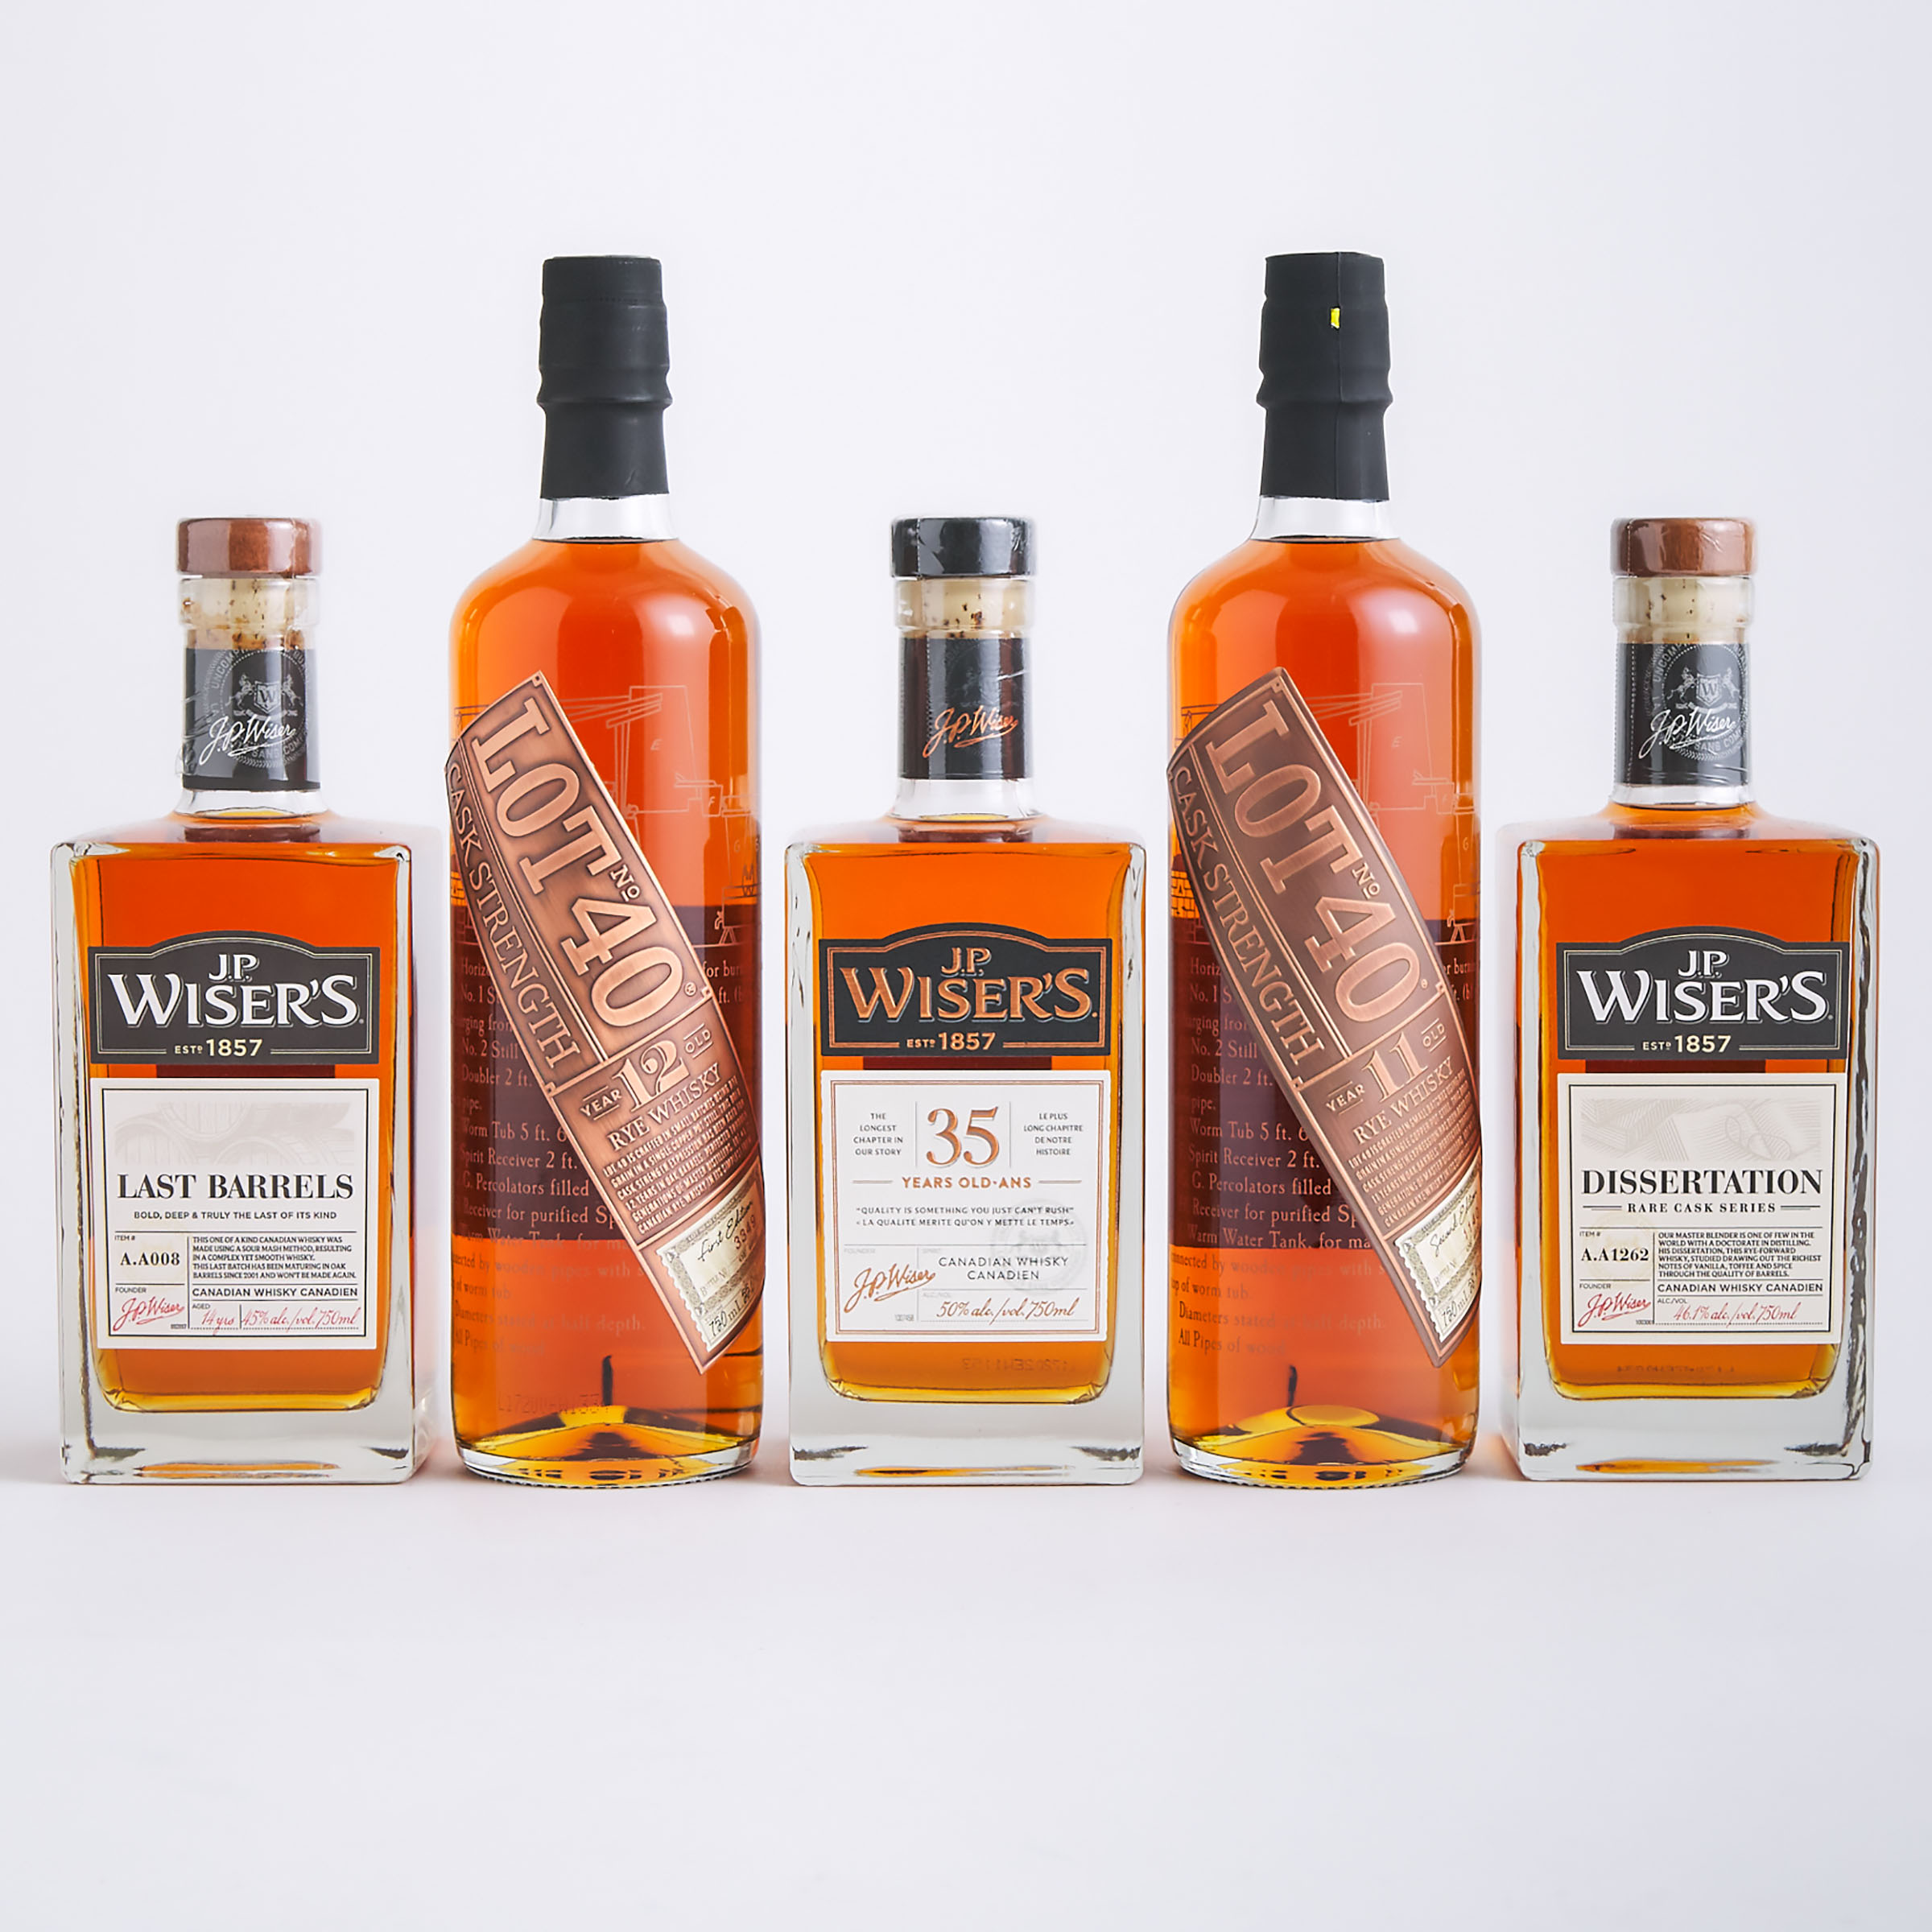 J.P. WISER'S 35 YEAR OLD CANADIAN WHISKY 35 YEARS (ONE 750 ML)
J.P. WISER'S DISSERTATION CANADIAN WHISKY NAS (ONE 750 ML)
J.P. WISER'S LAST BARRELS CANADIAN WHISKY NAS (ONE 750 ML)
LOT 40 CASK STRENGTH RYE WHISKY 12 YEARS (ONE 750 ML)
LOT 40 CASK STRENGTH RYE WHISKY 11 YEARS (ONE 750 ML)